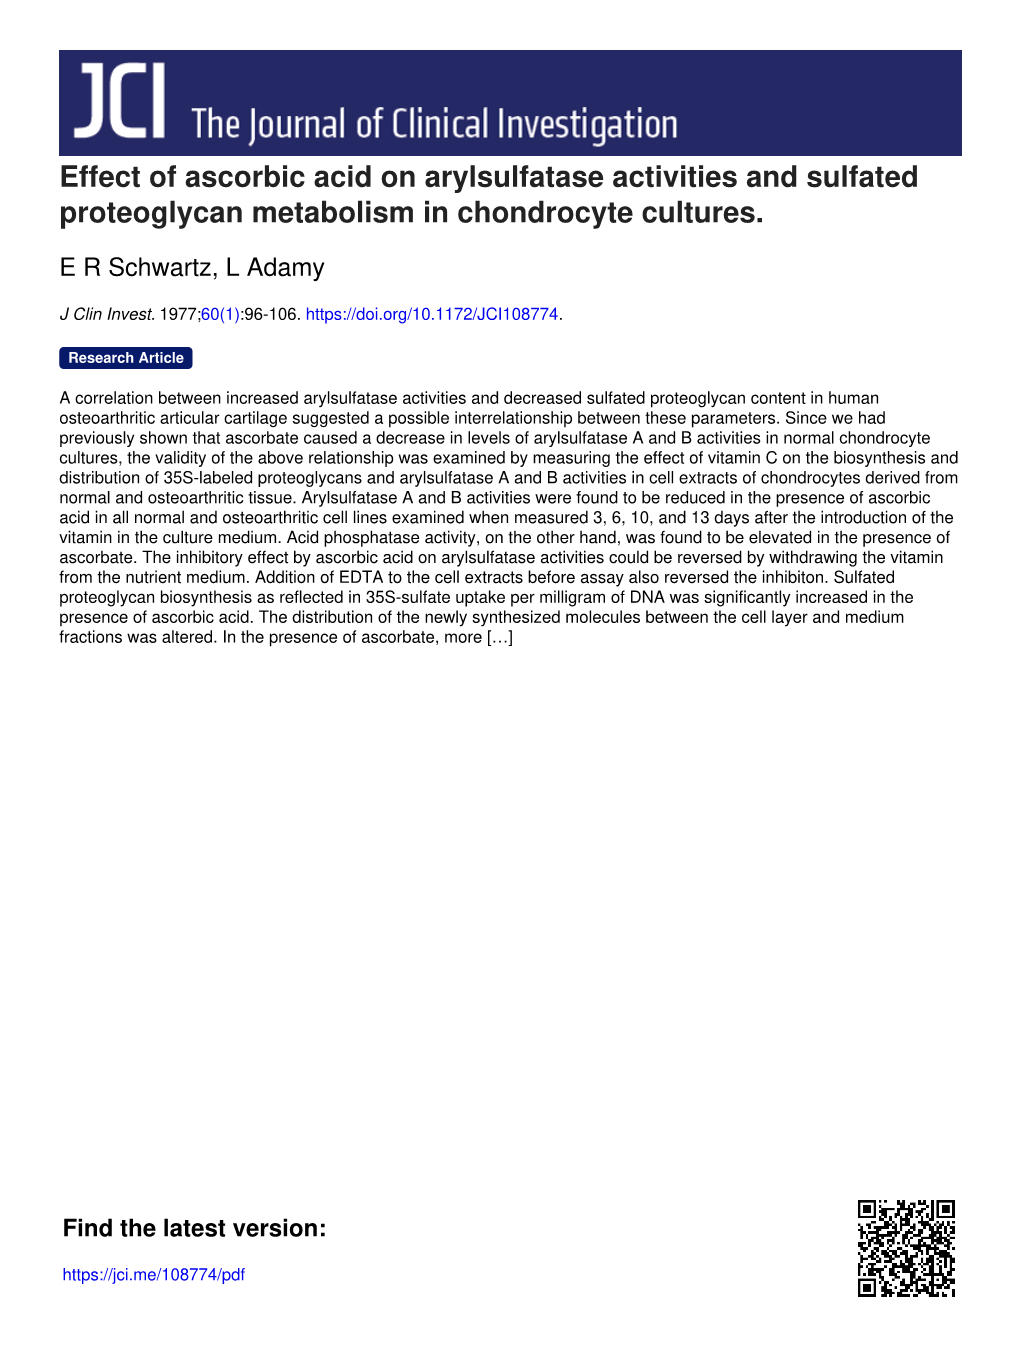 Effect of Ascorbic Acid on Arylsulfatase Activities and Sulfated Proteoglycan Metabolism in Chondrocyte Cultures